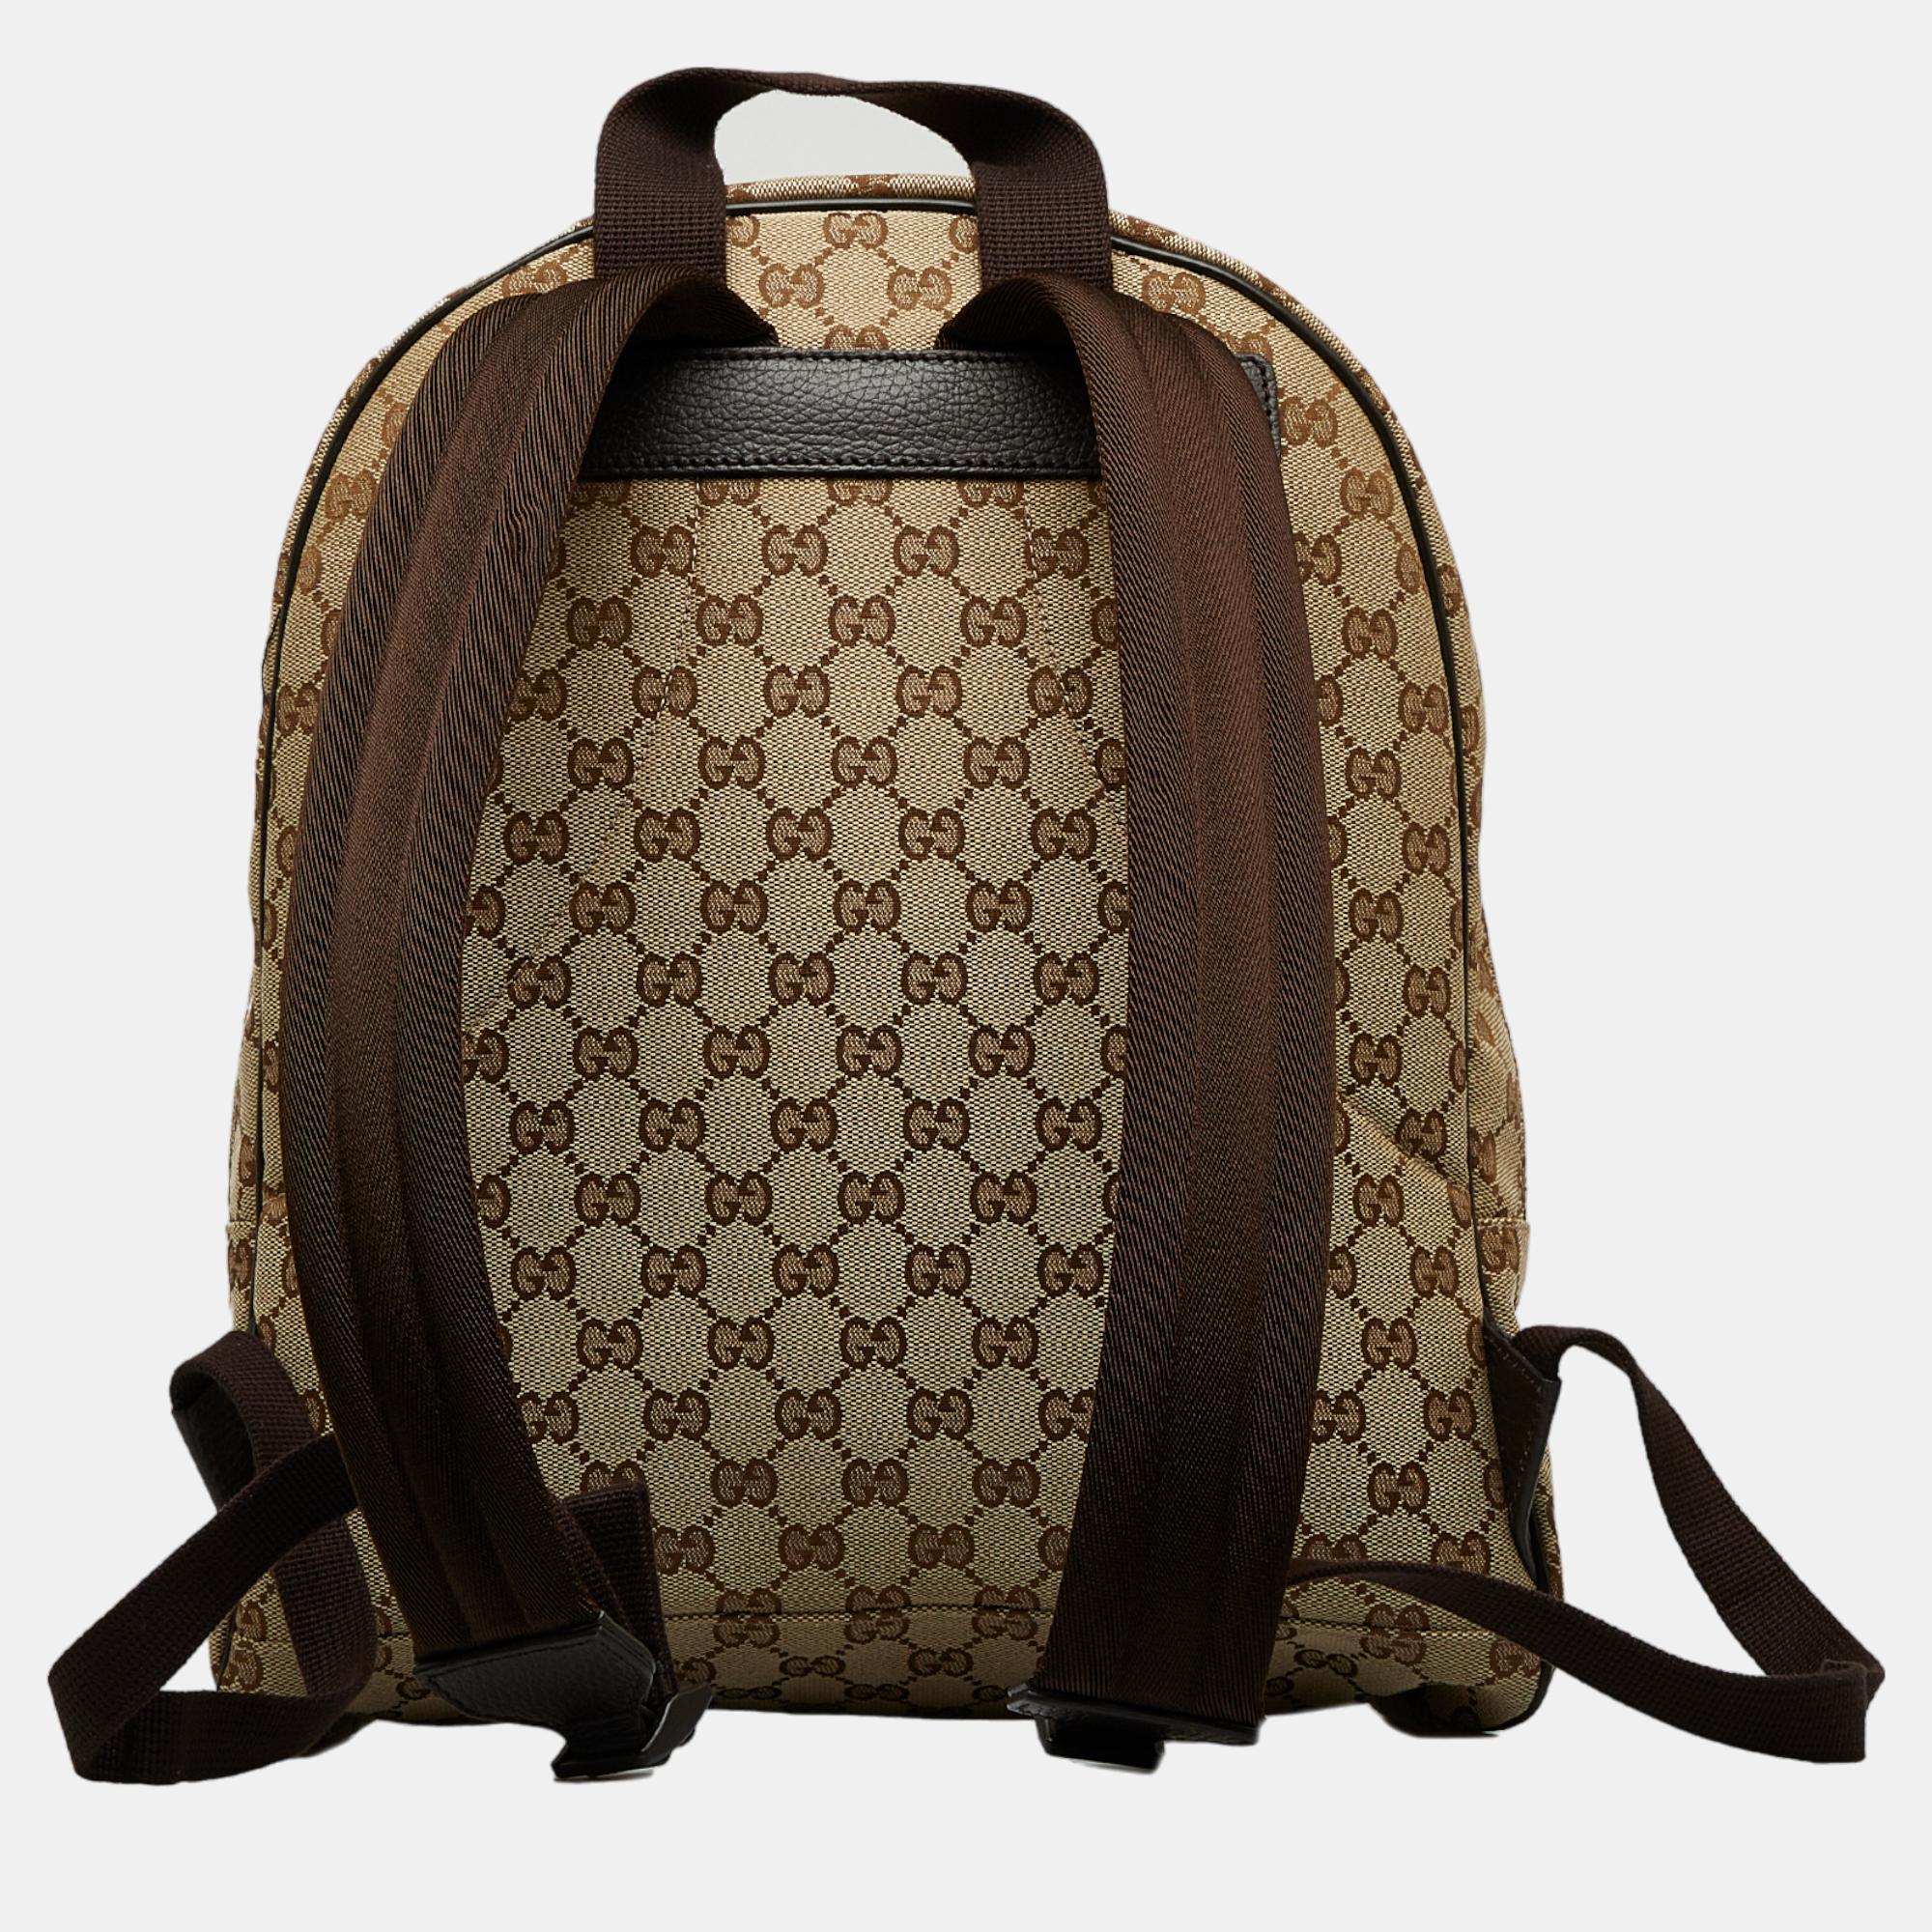 Gucci Beige/Brown GG Canvas Backpack